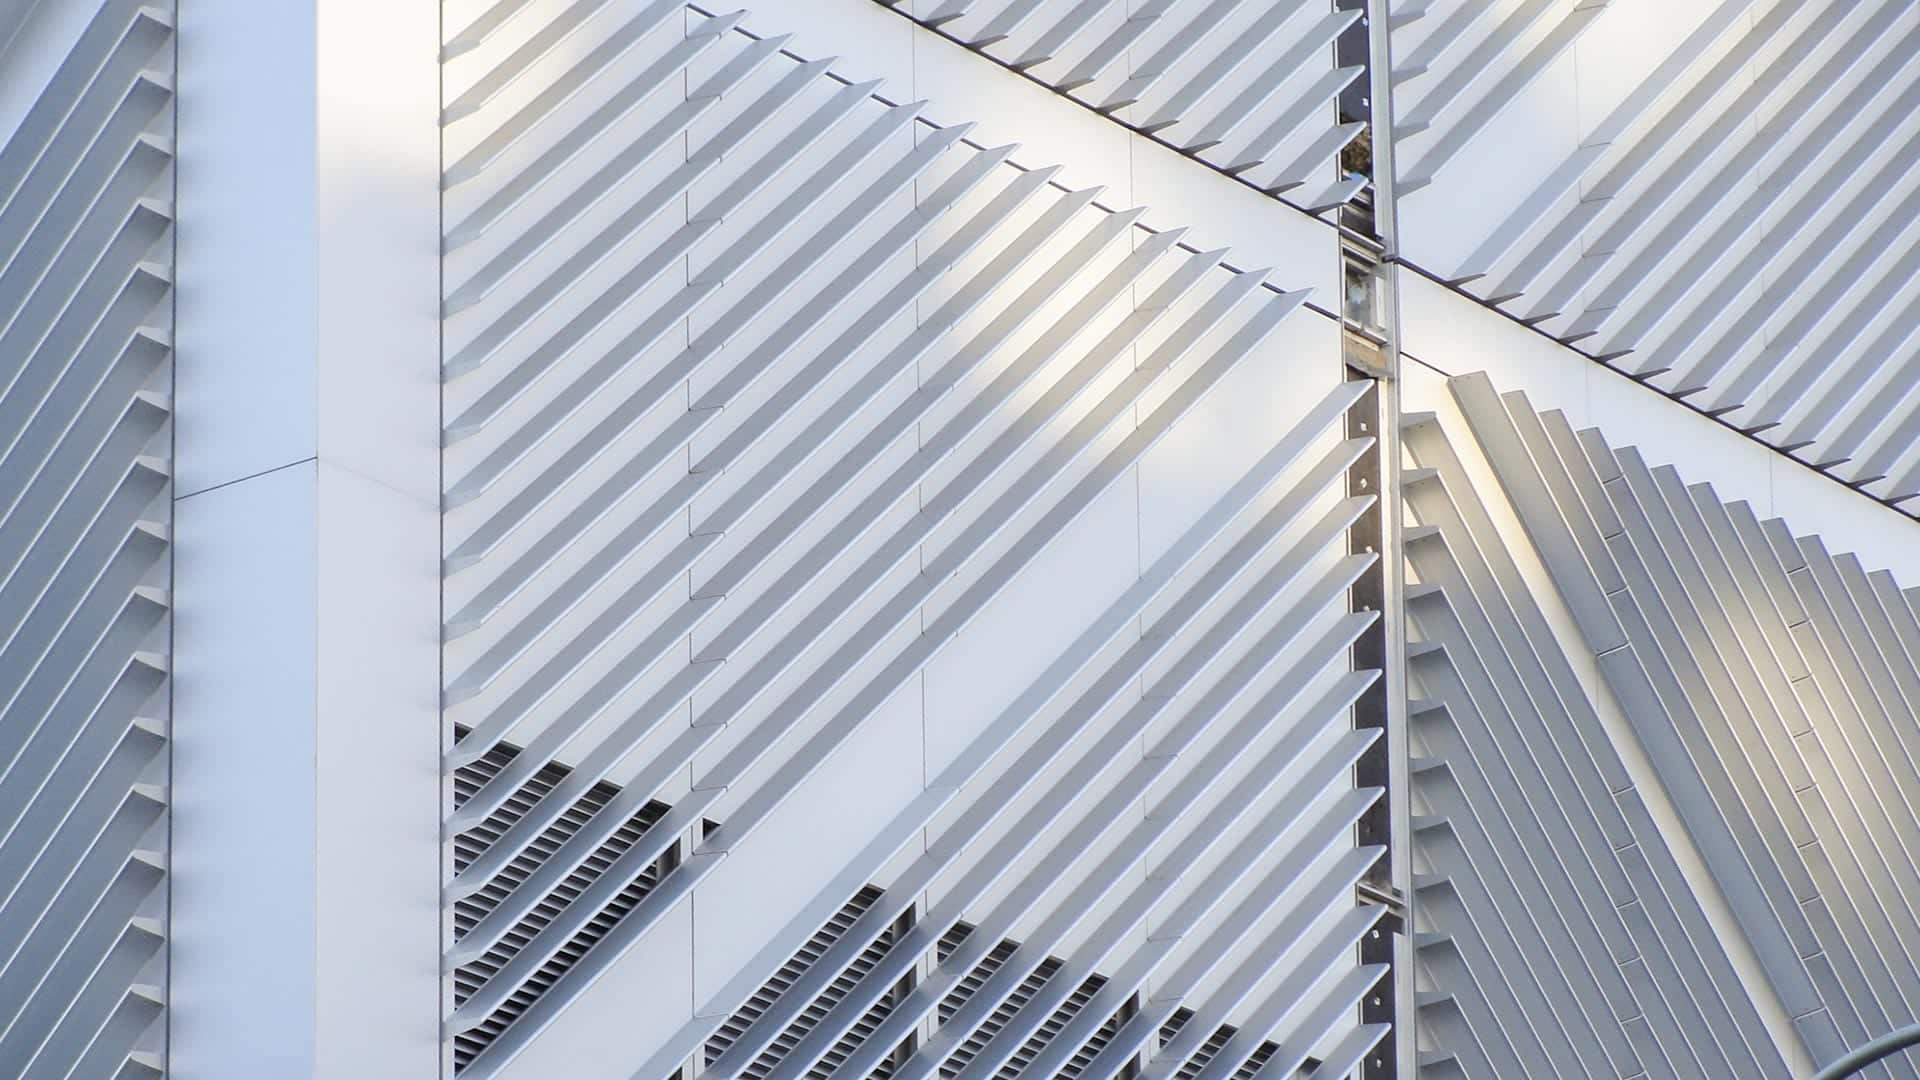 Detail of the aluminum extrusion system facade used on Columbia University.